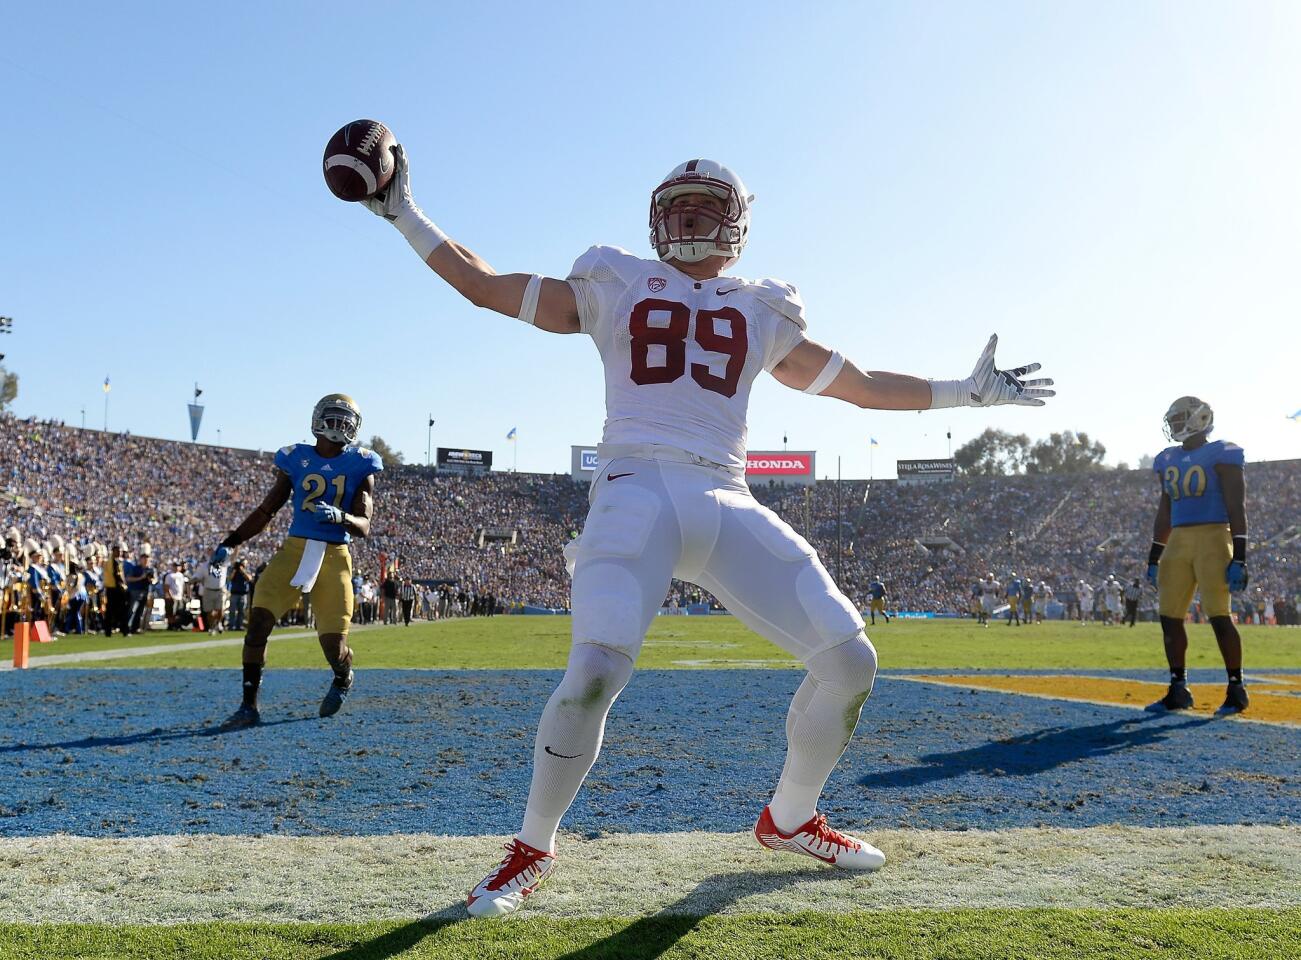 Stanford guilty of "major" NCAA violations for first time